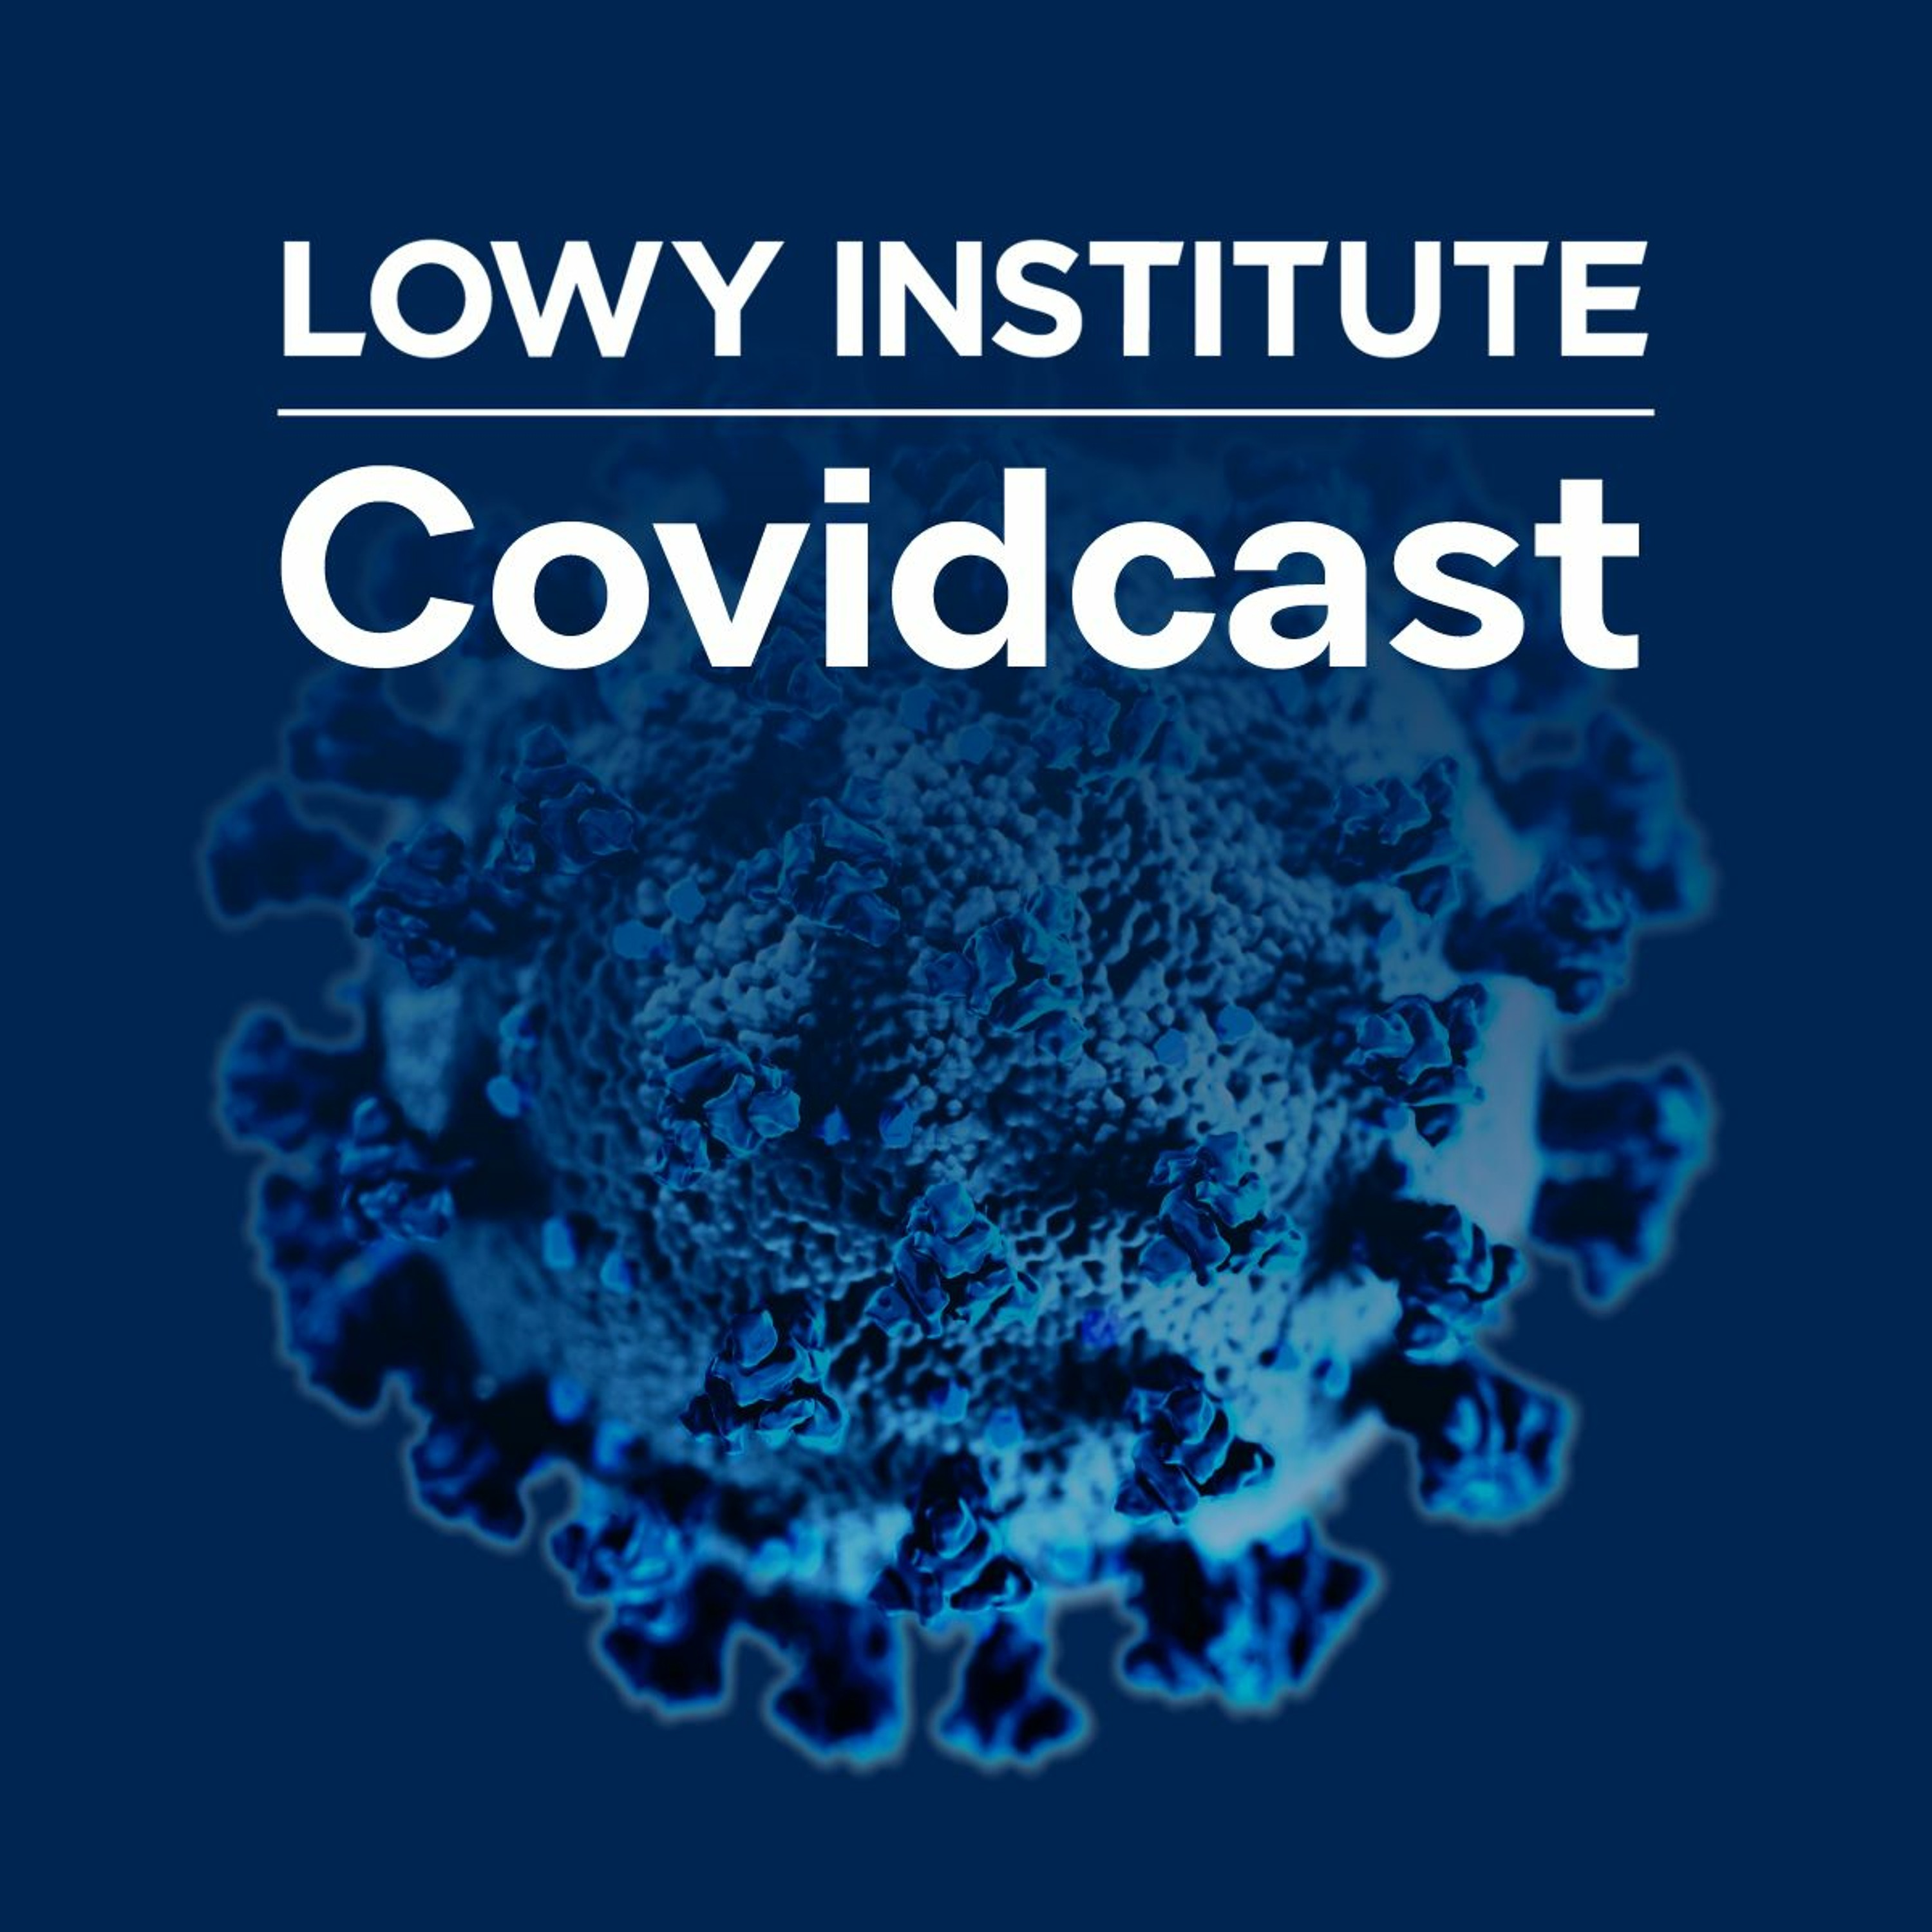 COVIDcast: 2020 Asia Power Index